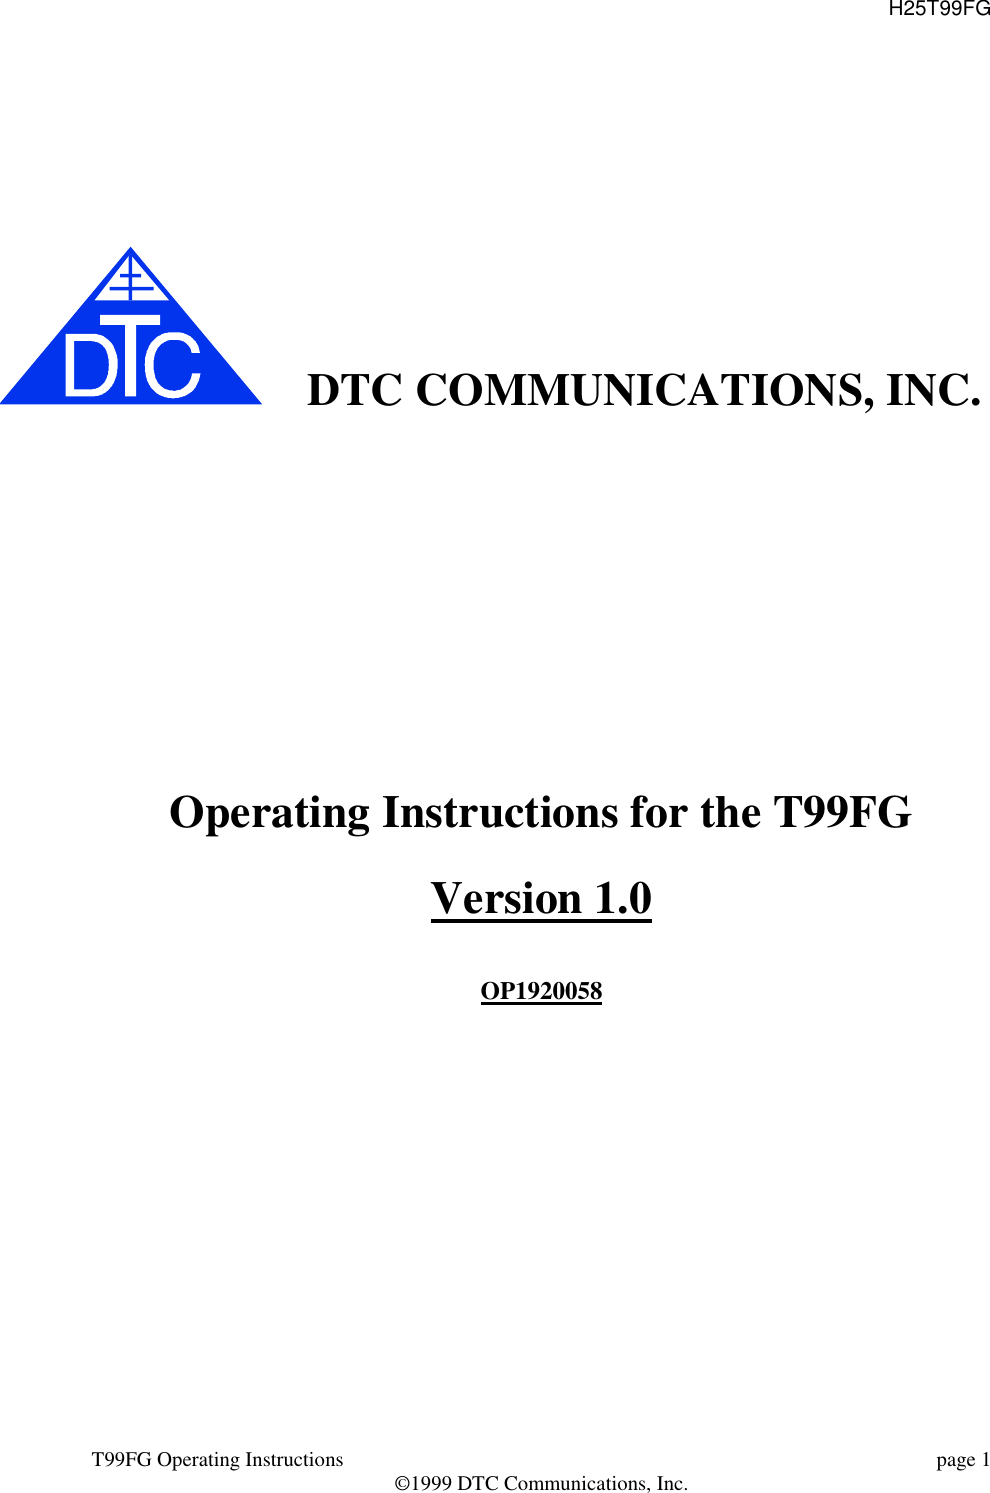 H25T99FGT99FG Operating Instructions page 1©1999 DTC Communications, Inc.DTC COMMUNICATIONS, INC.Operating Instructions for the T99FGVersion 1.0OP1920058